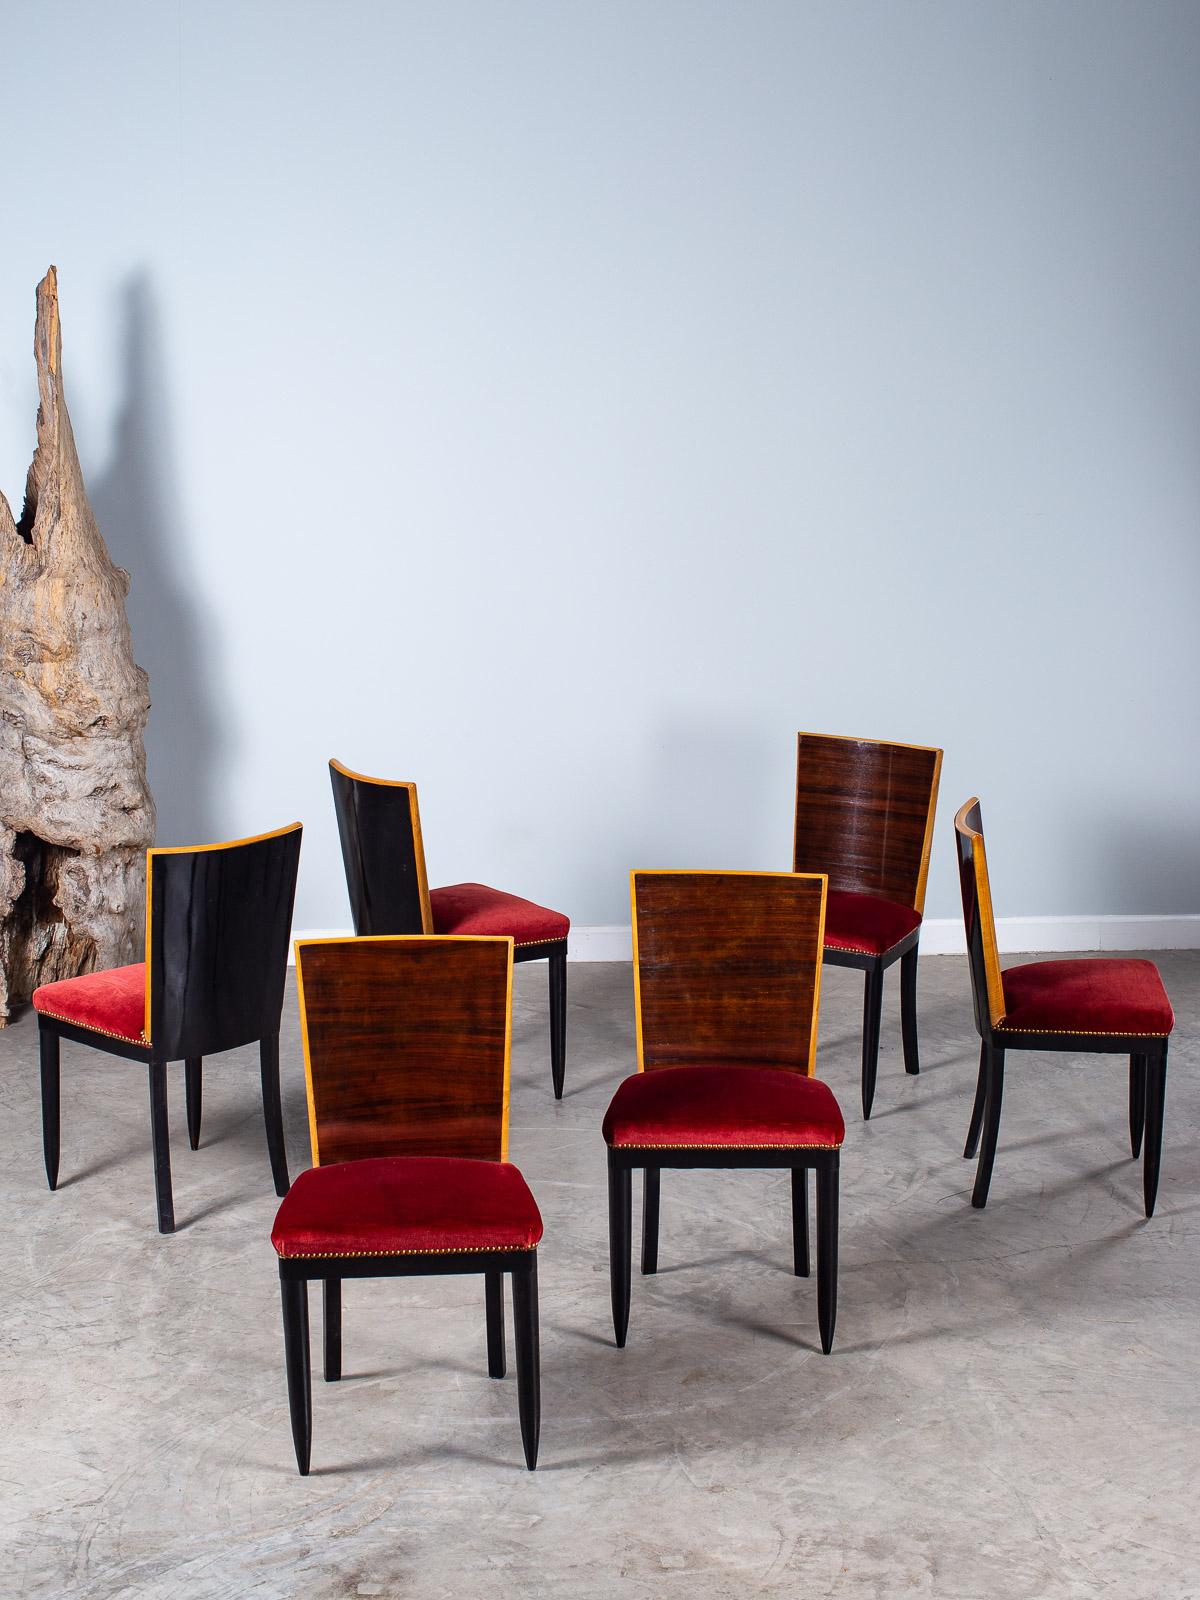 Set of six vintage Italian chairs designed by Osvaldo Borsani, circa 1950. These chic Mid-Century Modern chairs have a distinctive line that gives them their timeless contemporary flavor. The curved back is faced with rosewood set with the grain